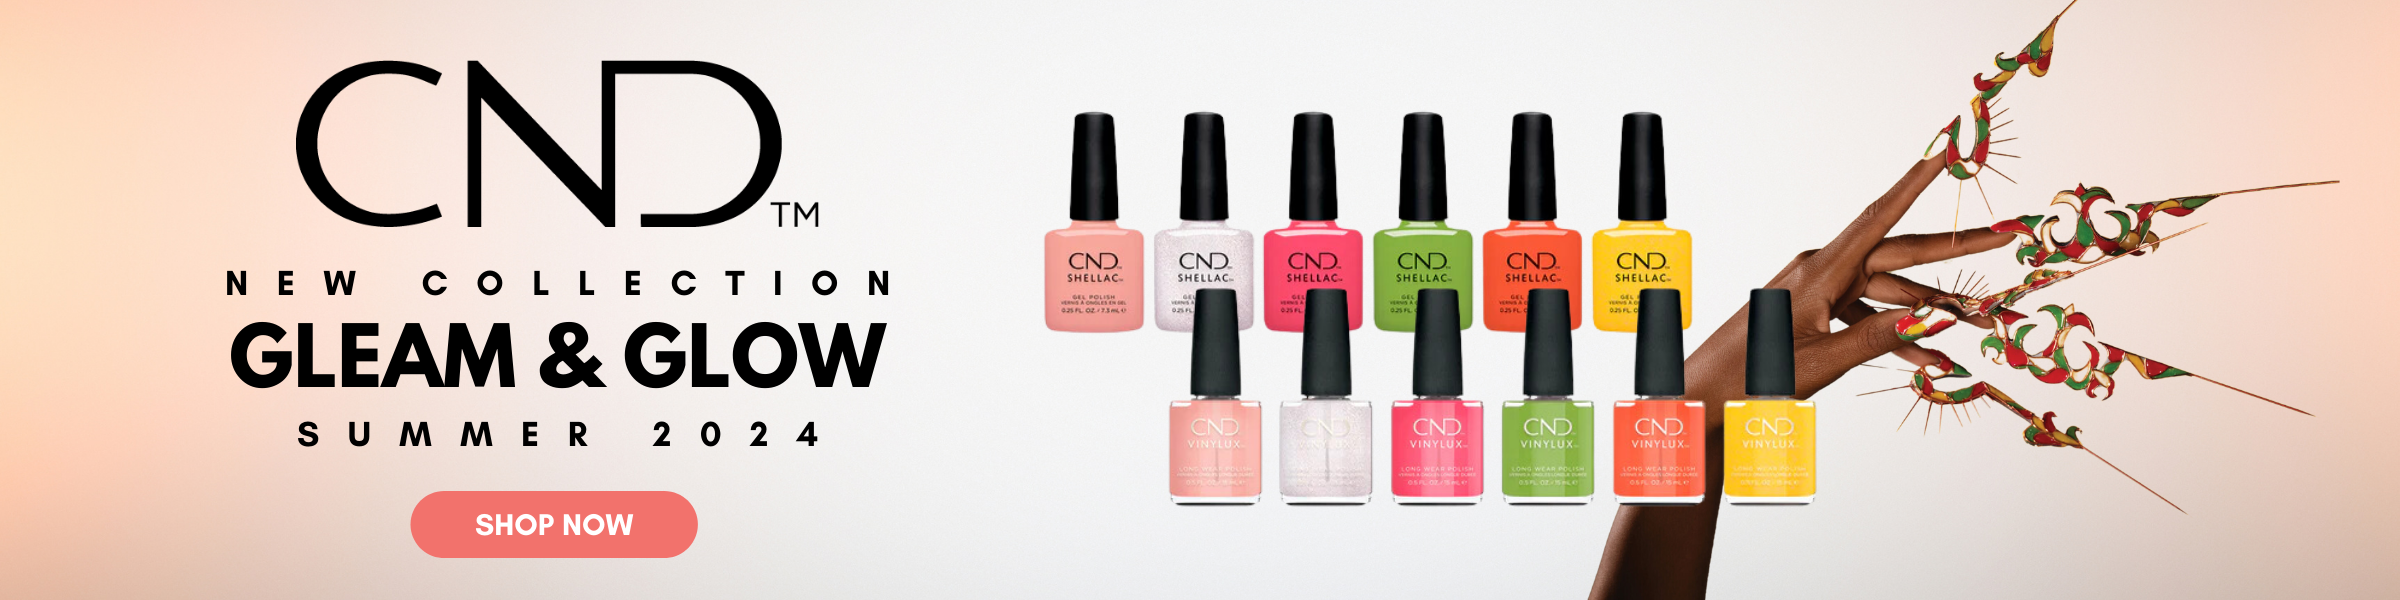 cnd summer 2024, cnd gleam and glow, acrygel, nail supply near me, nail polish, nail supply, classique, nail polish canada, aesthetician supplies wholesale